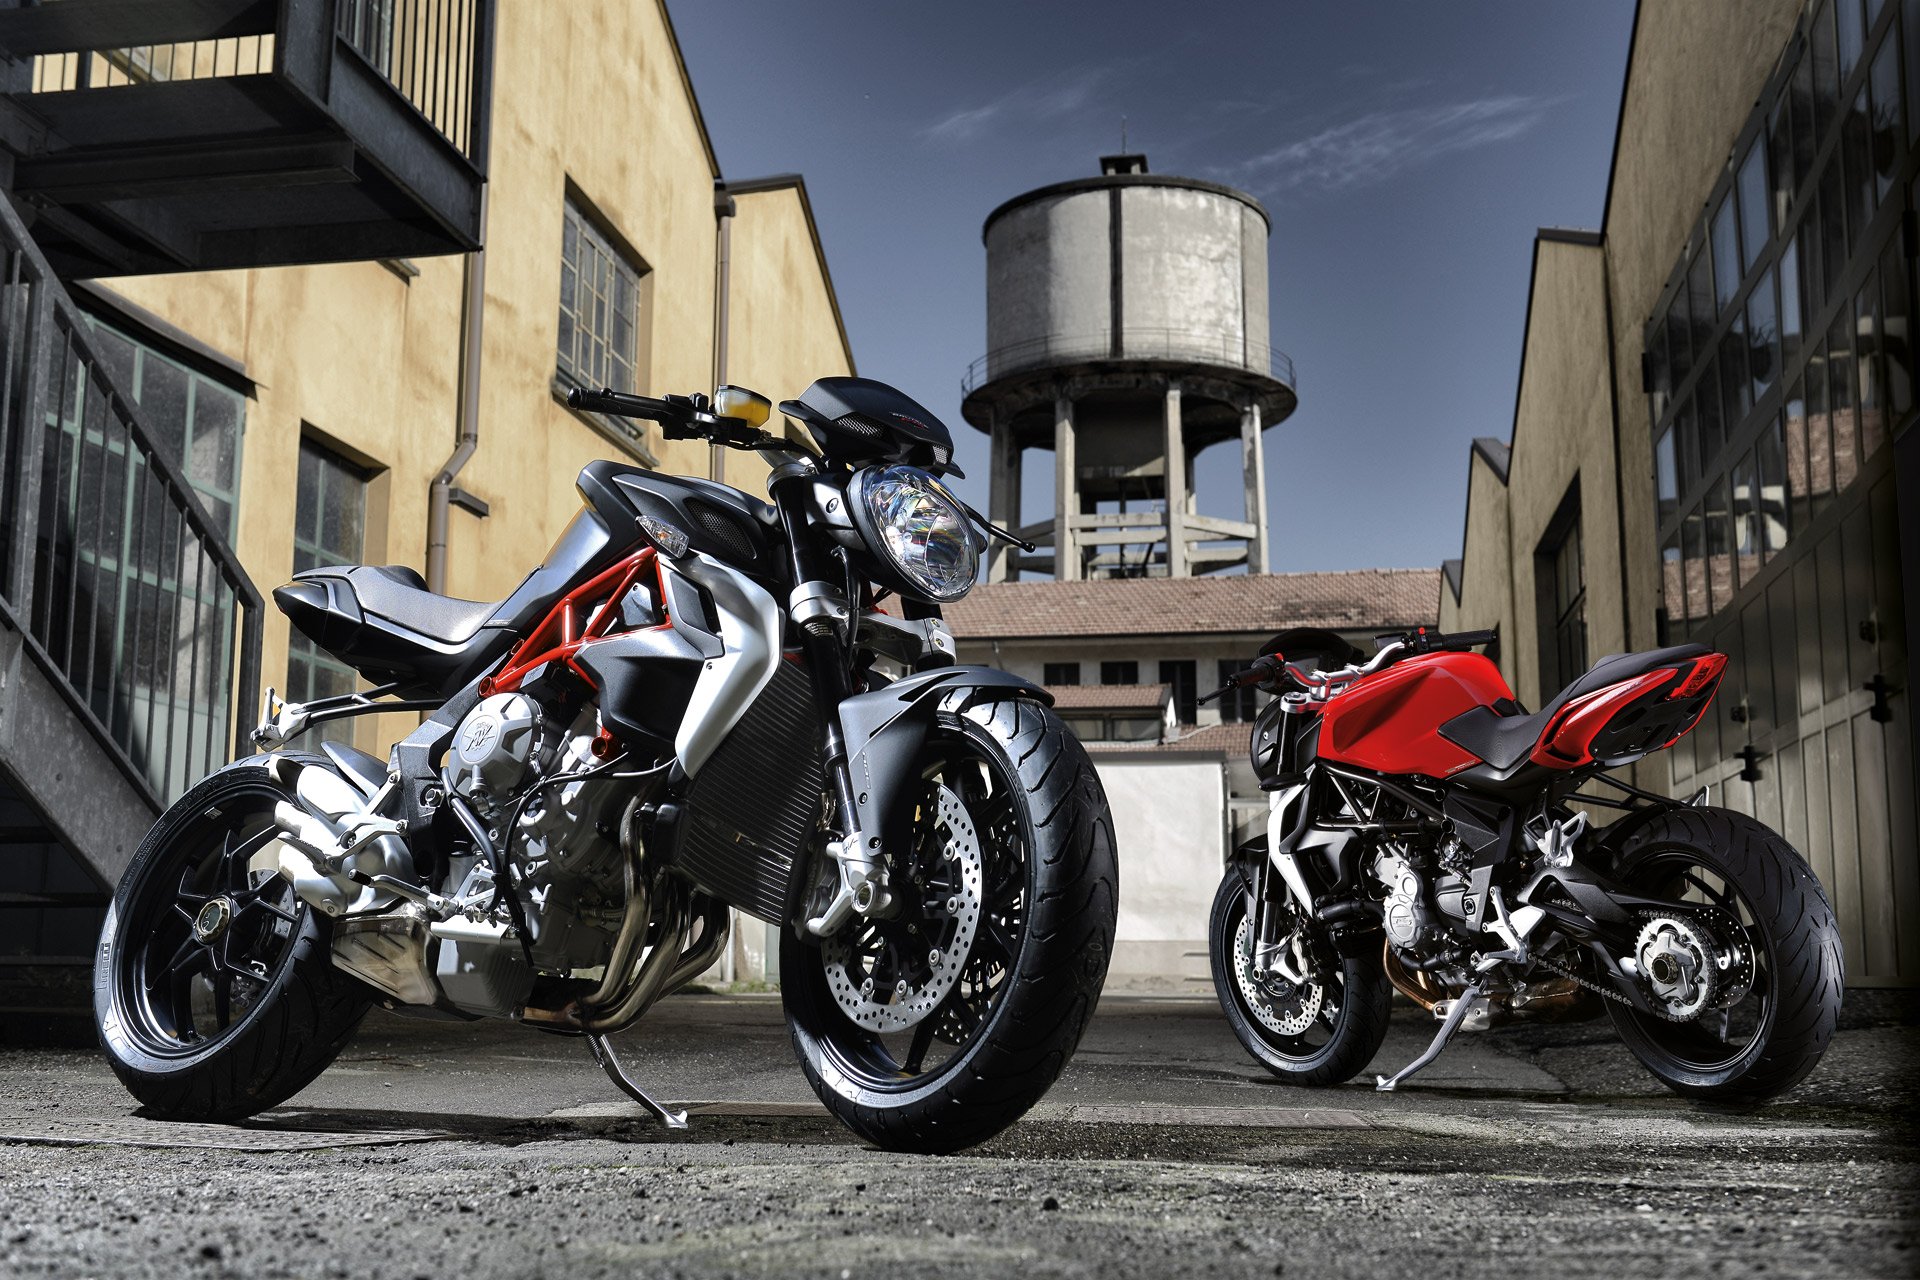 New MV Agusta Brutale 675 Expected This Year - autoevolution